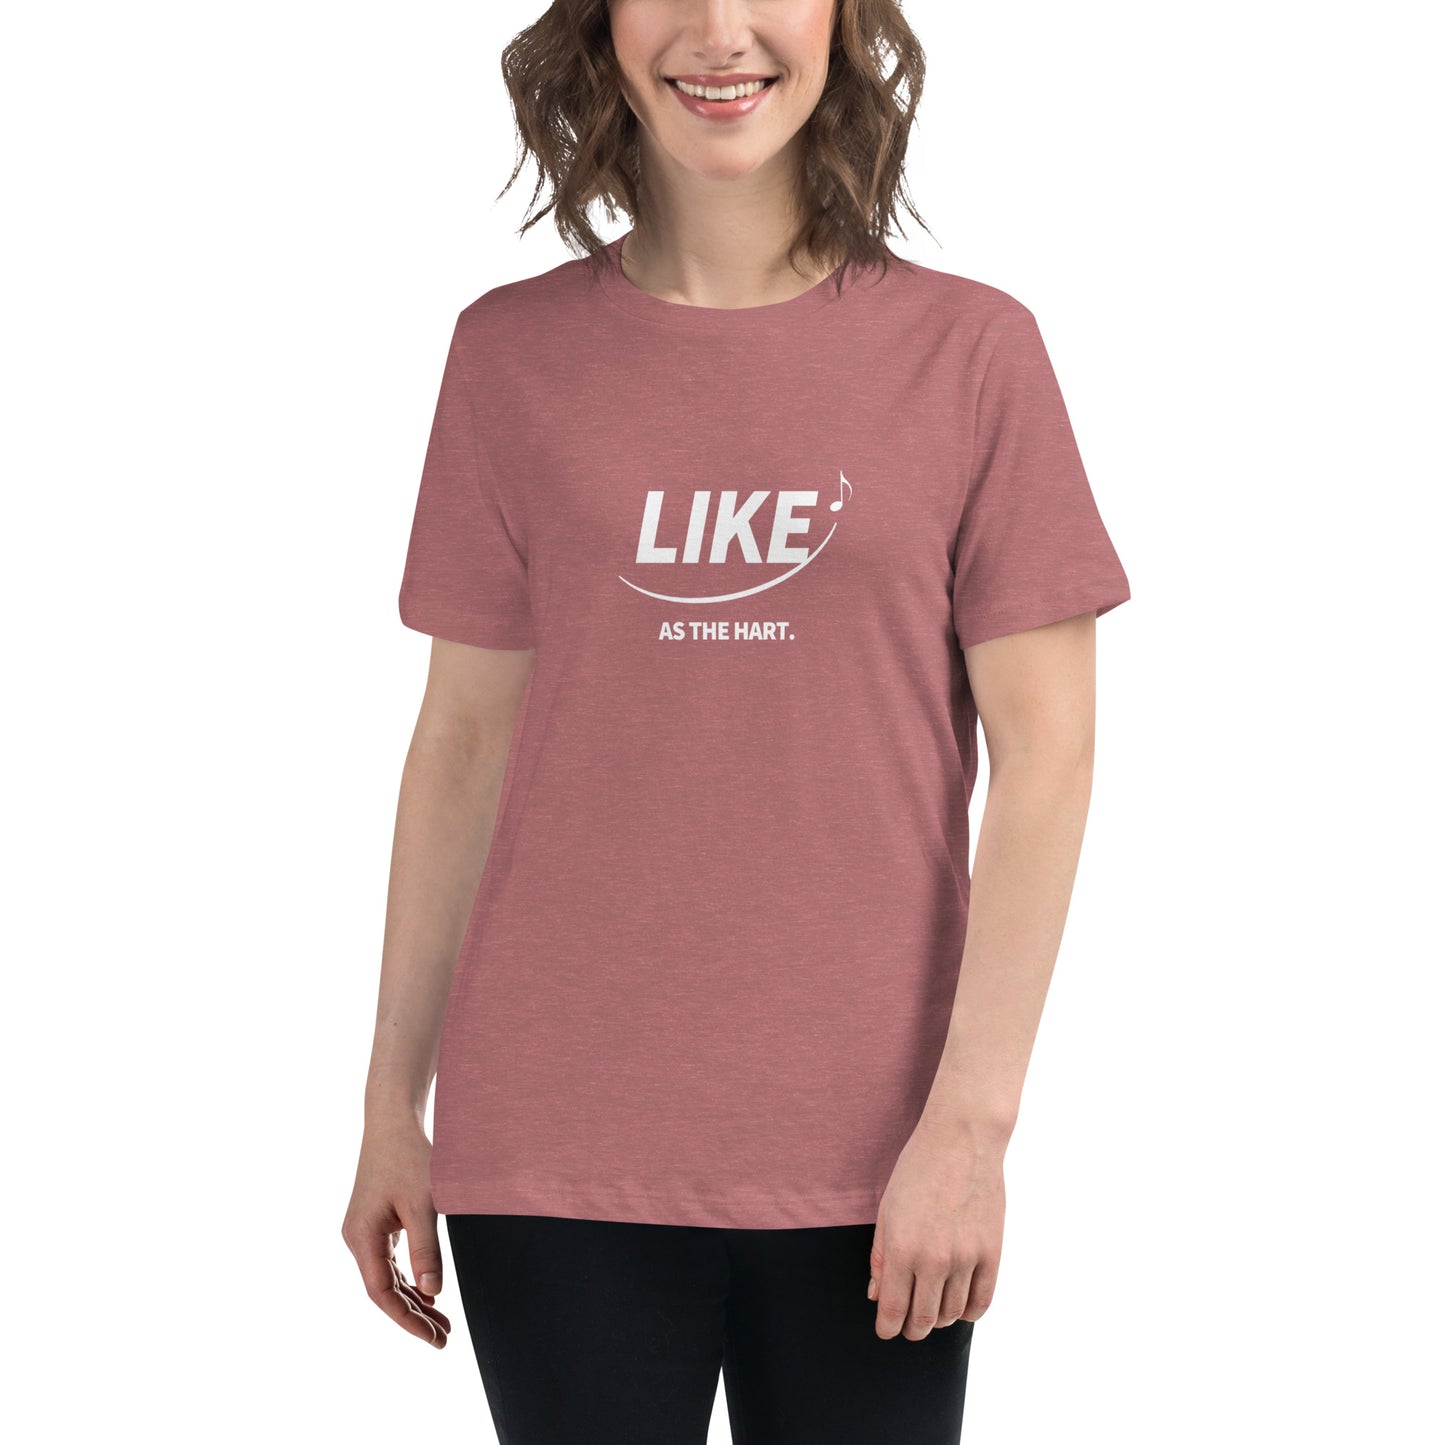 LIKE as the Hart - Women's Relaxed T-Shirt